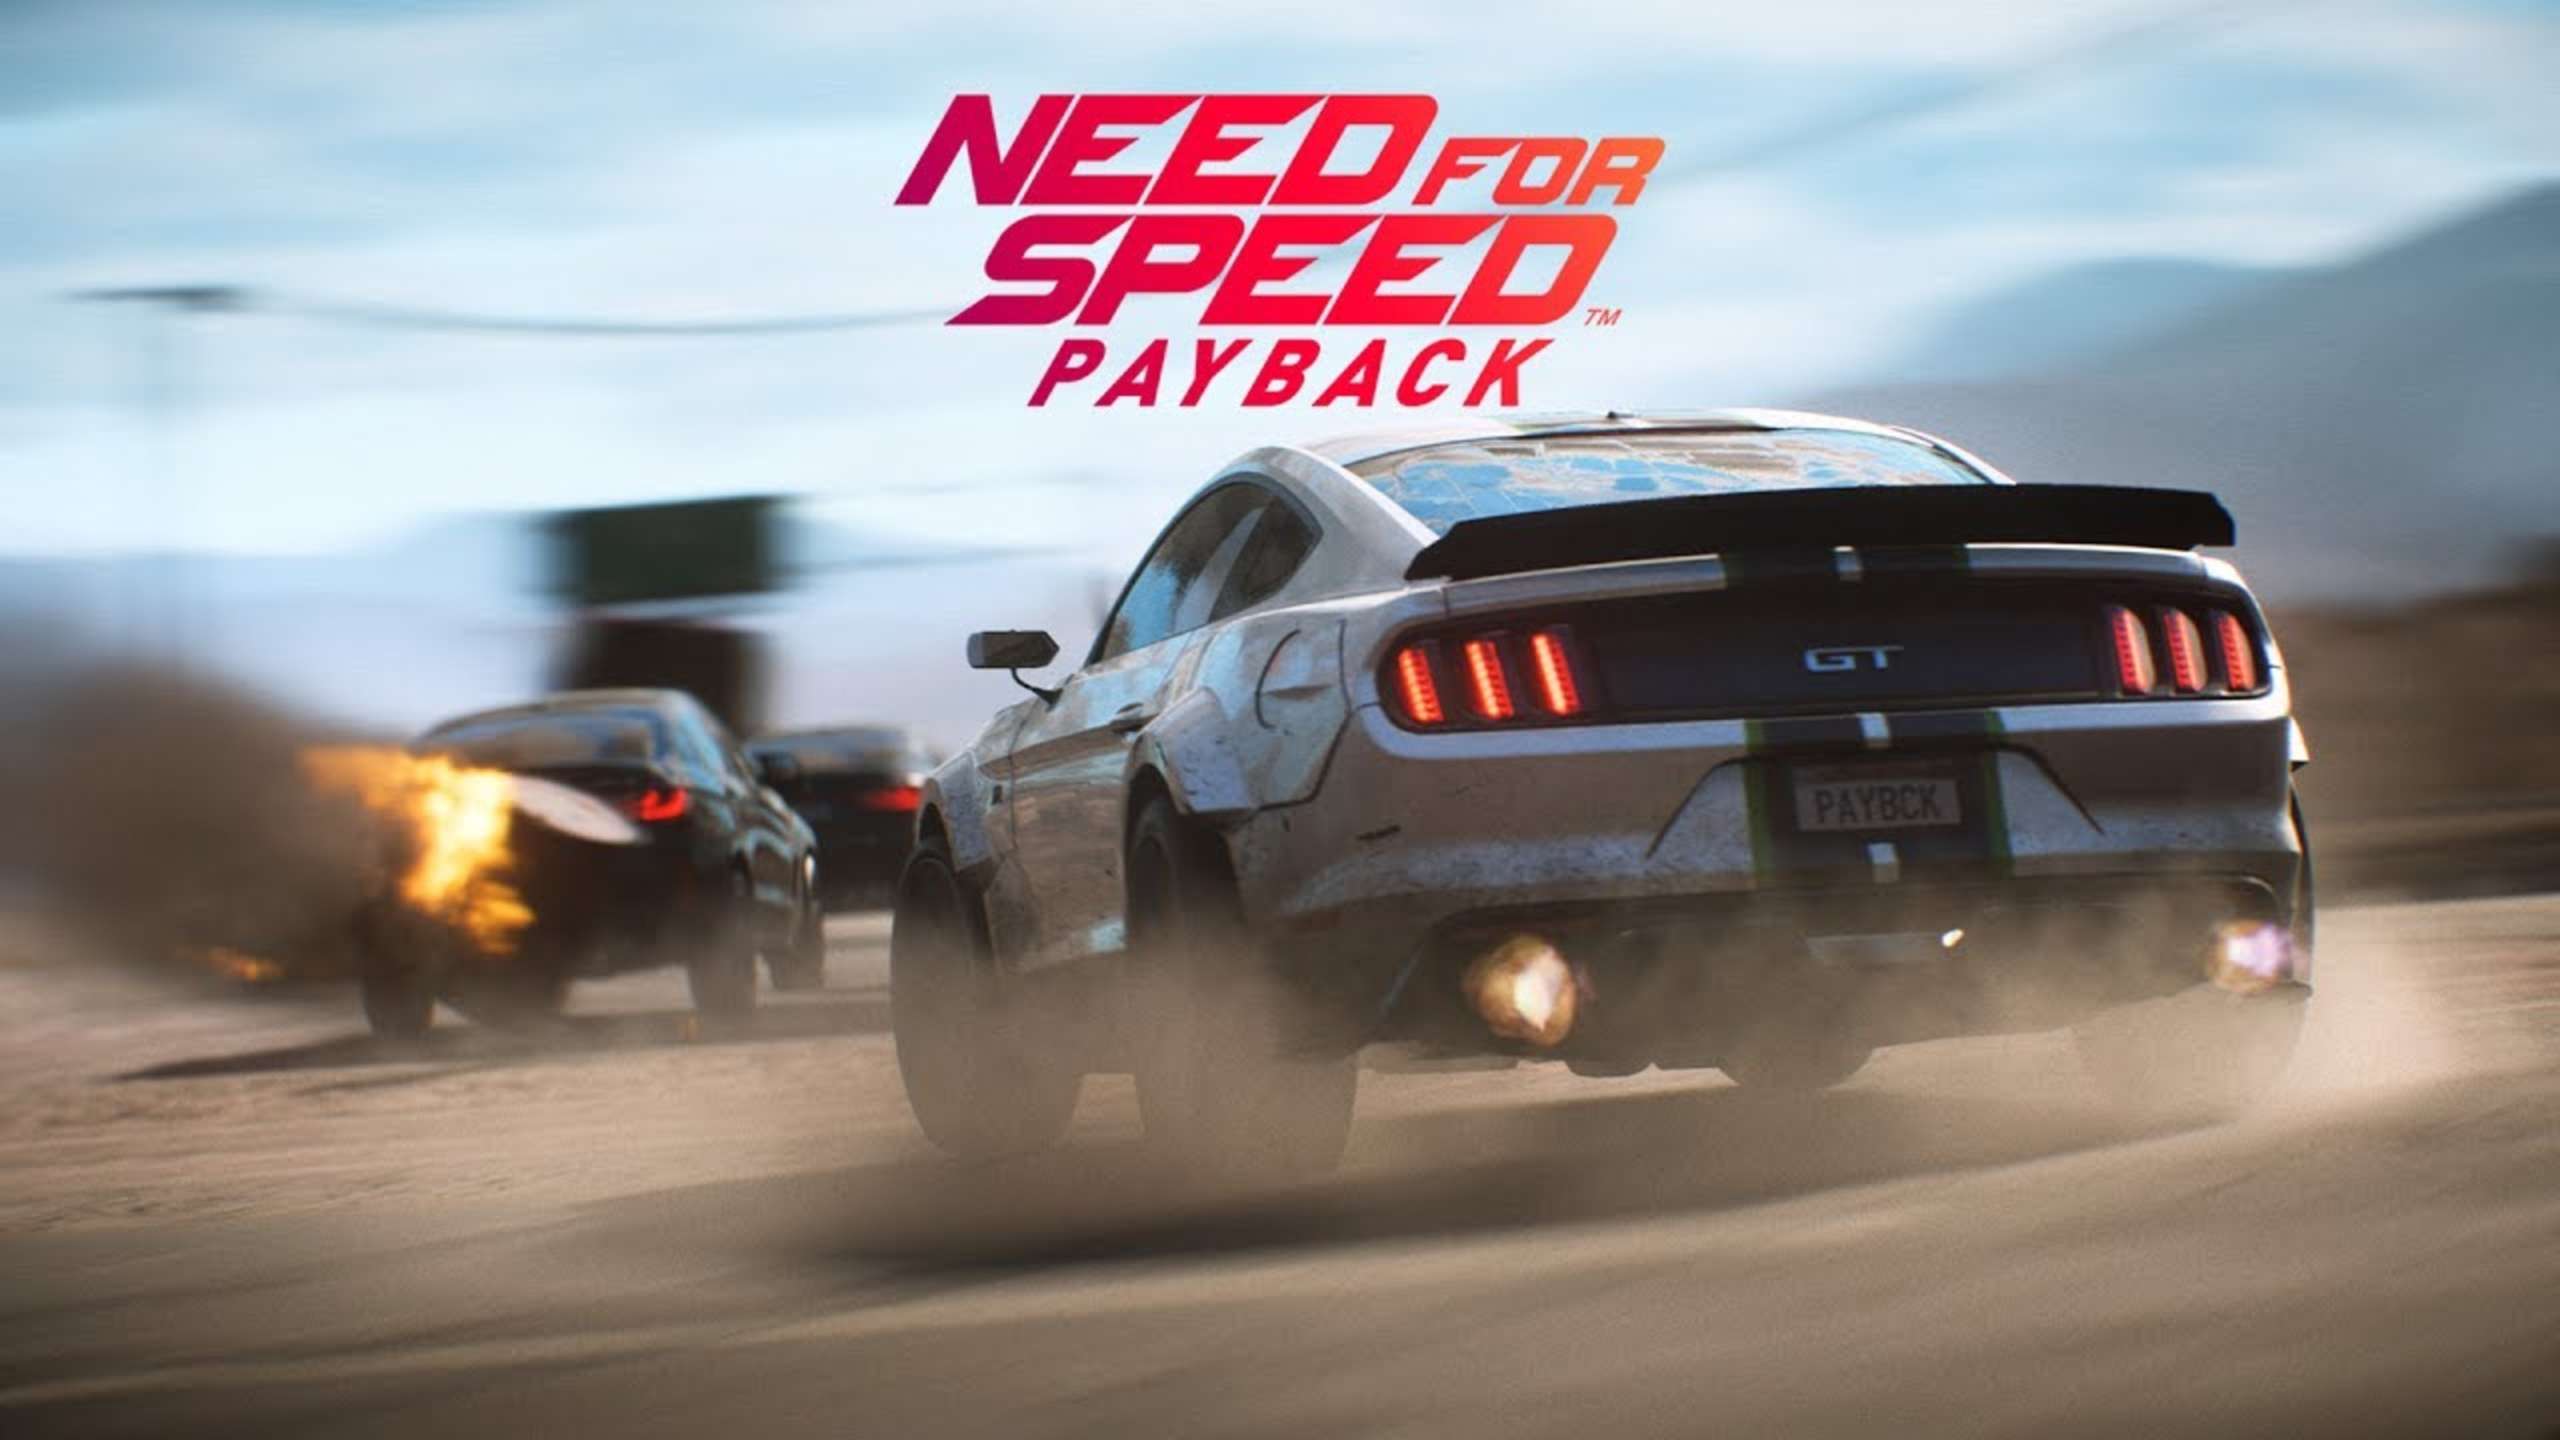 Need for speed 2017. Игра need for Speed Payback. Need for Speed Payback Deluxe Edition. Need for Speed: Payback (2017). NFS Payback 2020.